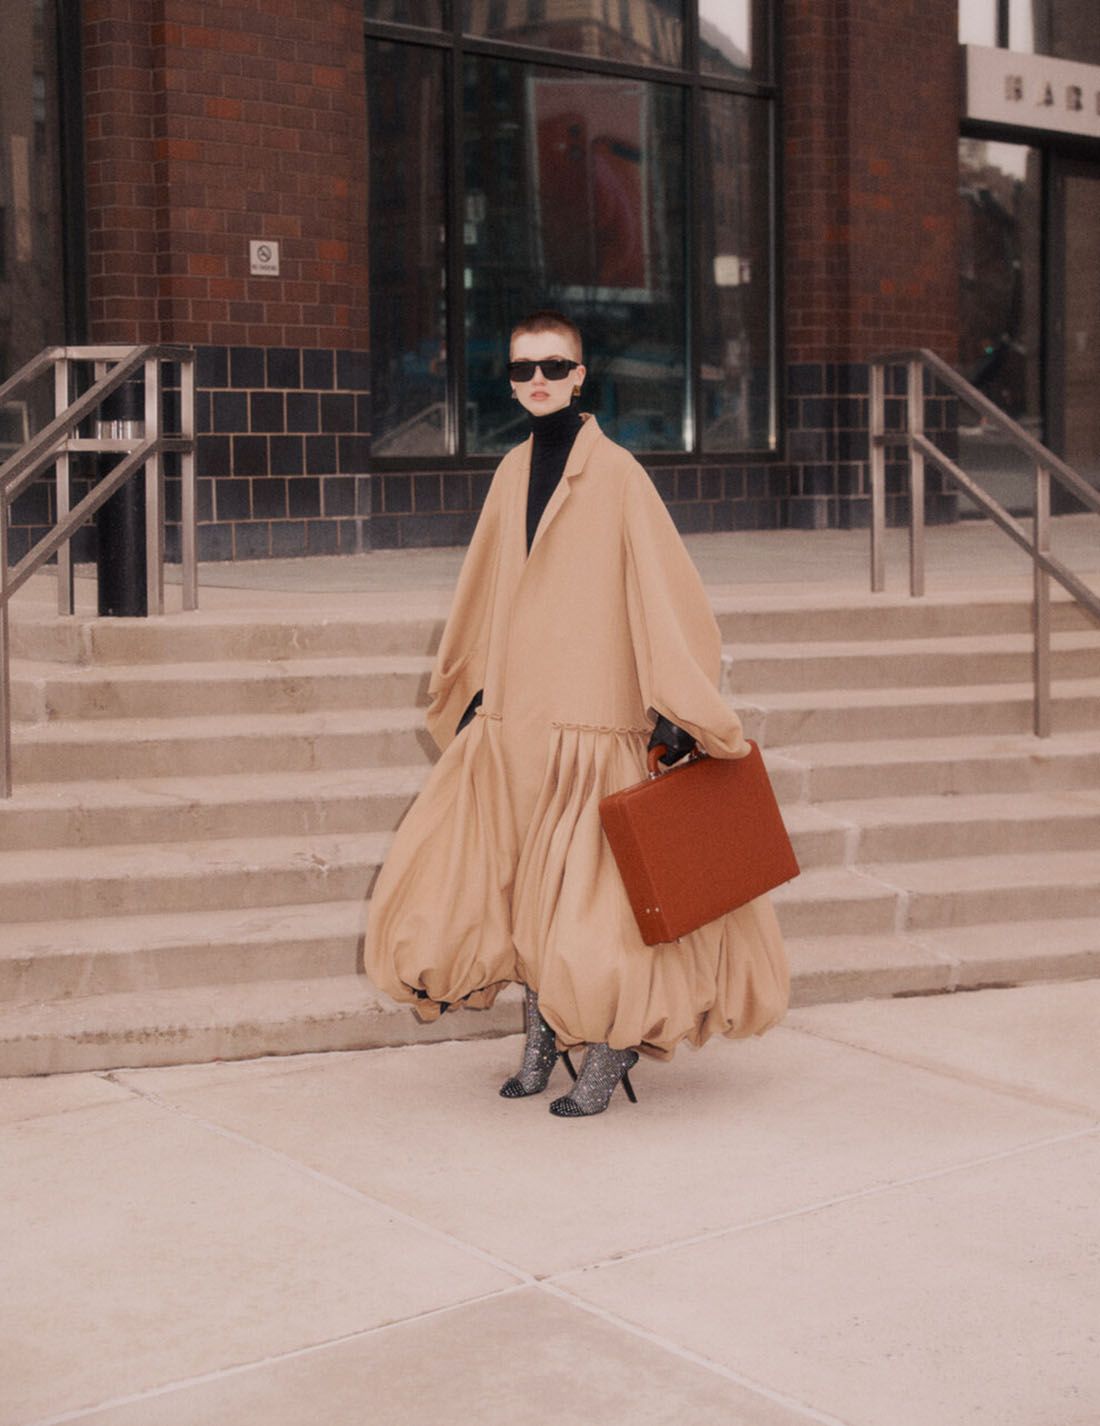 Clothing & Accessories: Dress by Loewe; Boots, Earrings by Balenciaga; Sunglasses by MYKITA Uptown Girl: Ruth Bell by Nagi Sakai for Vogue Ukraine April 2021